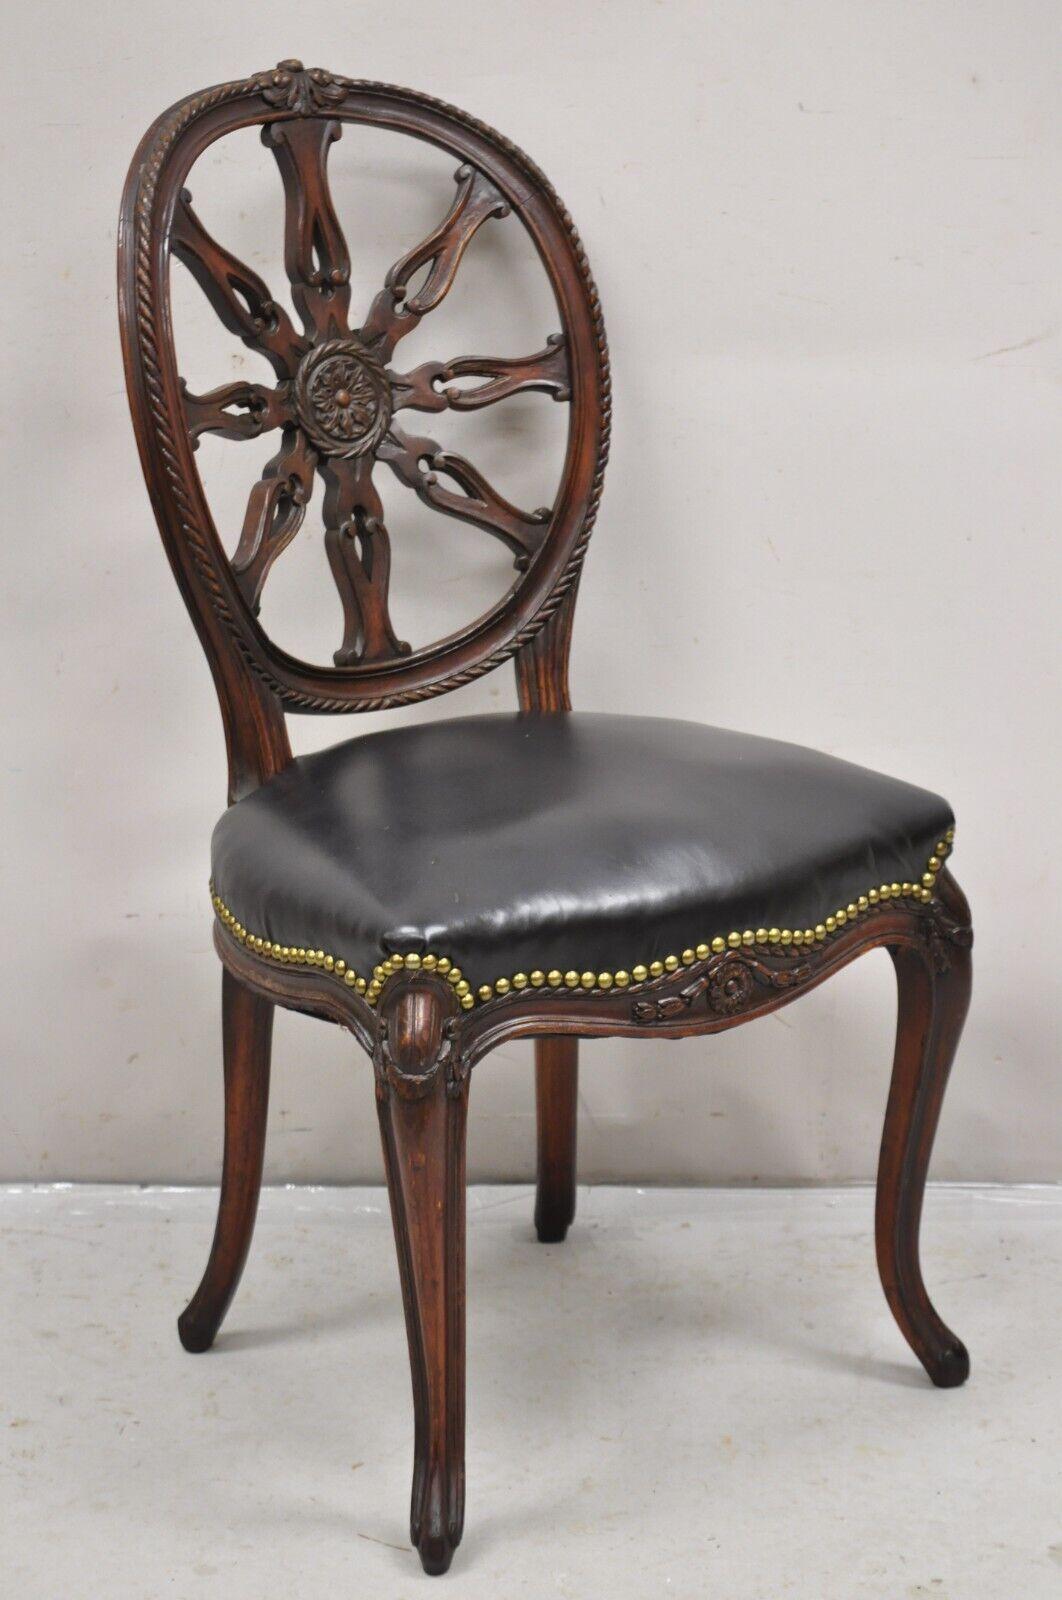 Antique Italian Neoclassical Style Pinwheel Carved Mahogany Dining Chairs - Set of 4. Item features a distressed finish, solid wood frames, pinwheel carved backs, cabriole legs. One chair with original distressed black leather seat and the other